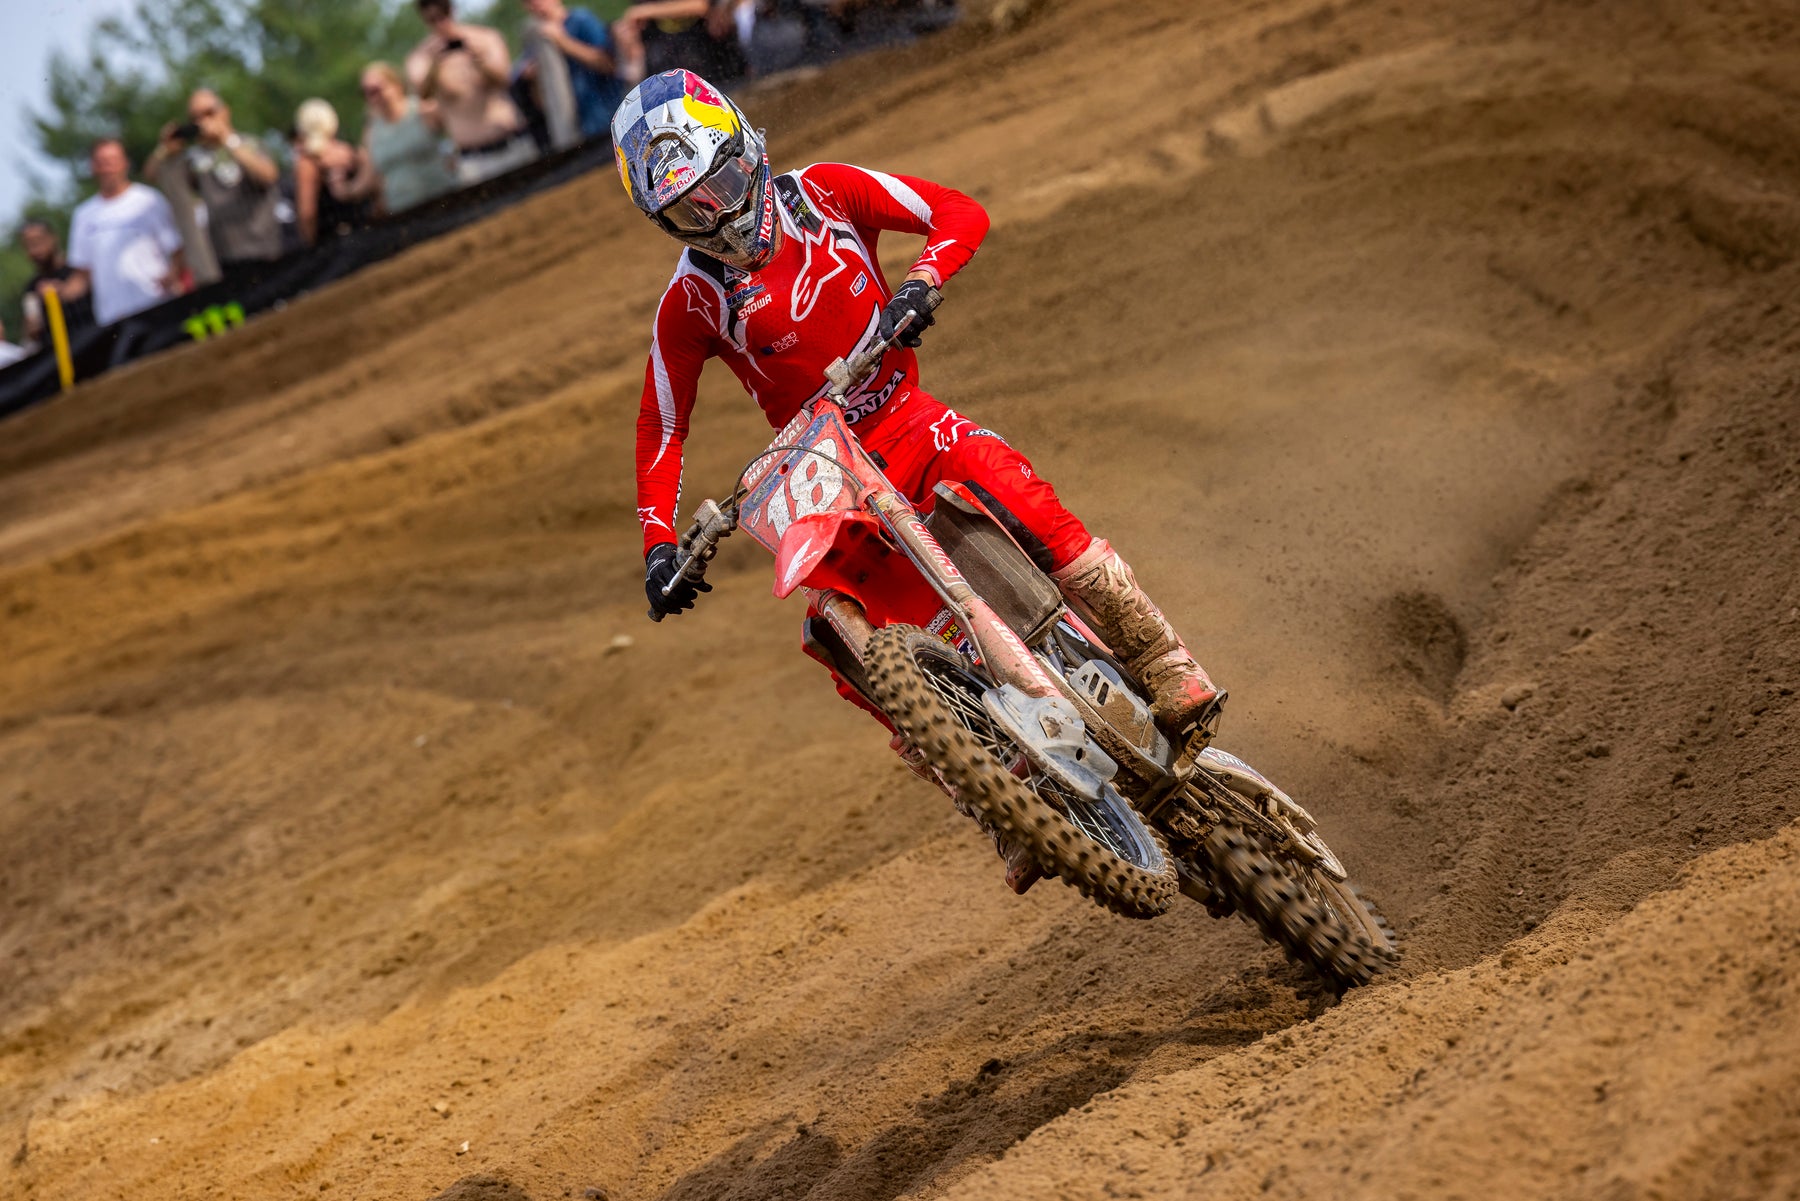 ALPINESTARS TOP FOUR LOCK-OUT AS HIGH-FLYING JETT LAWRENCE DOMINATES 450 RACES AT SOUTHWICK